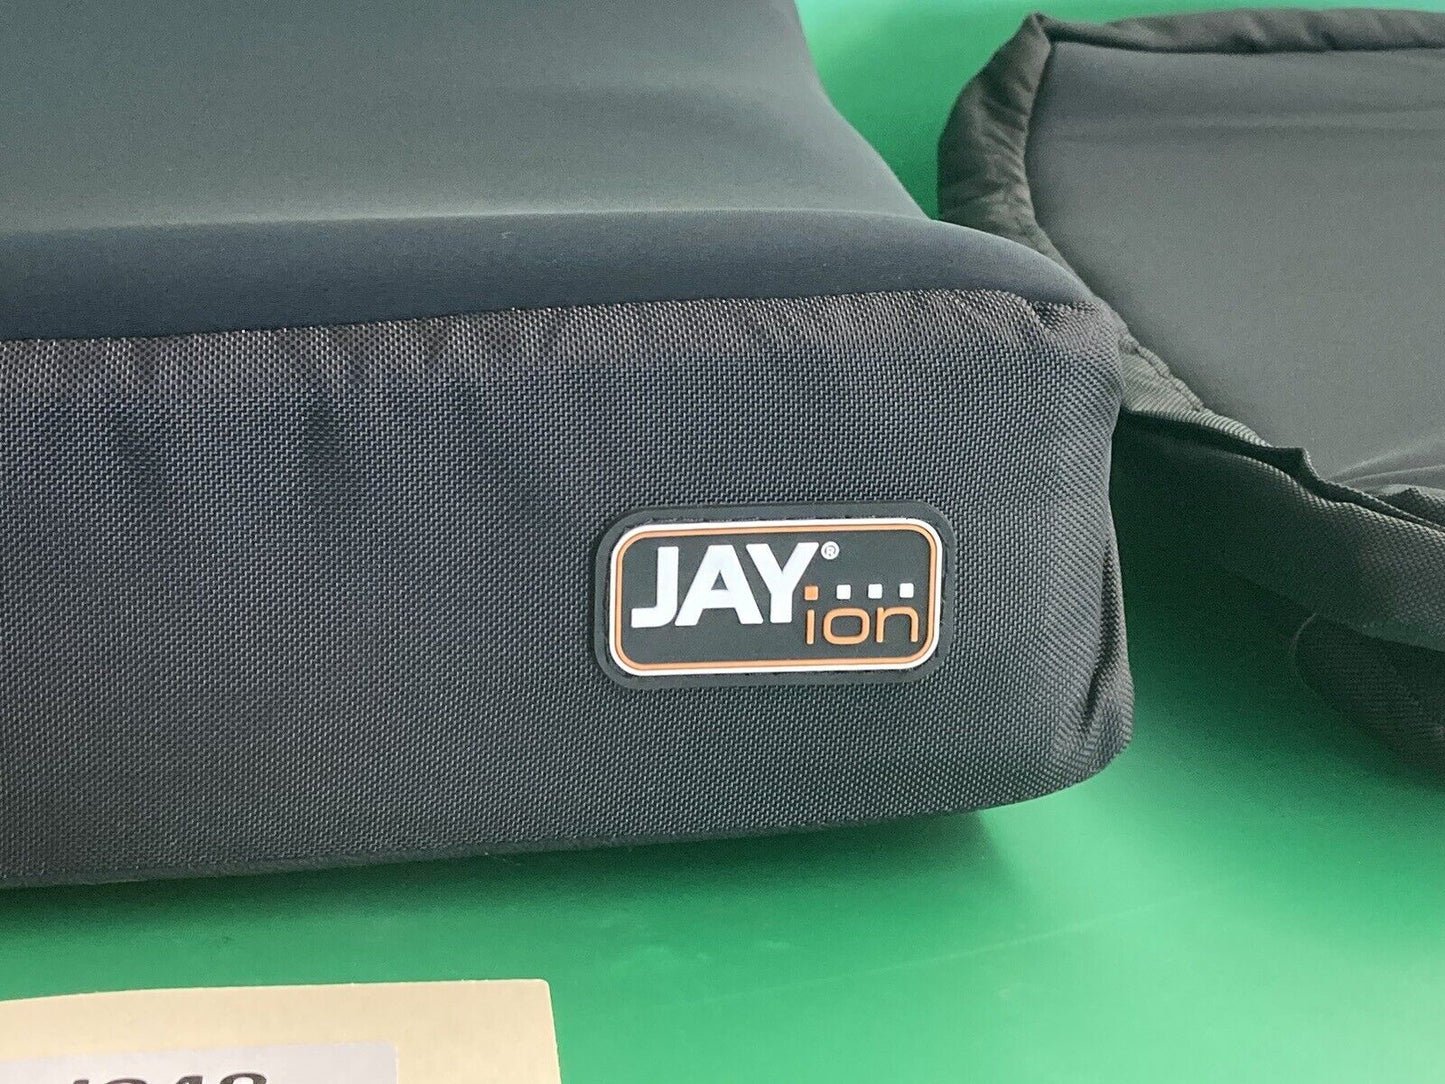 NEW* JAY ION Foam Seat Cushion for Power and Manual Wheelchairs 16" x 21" #i848